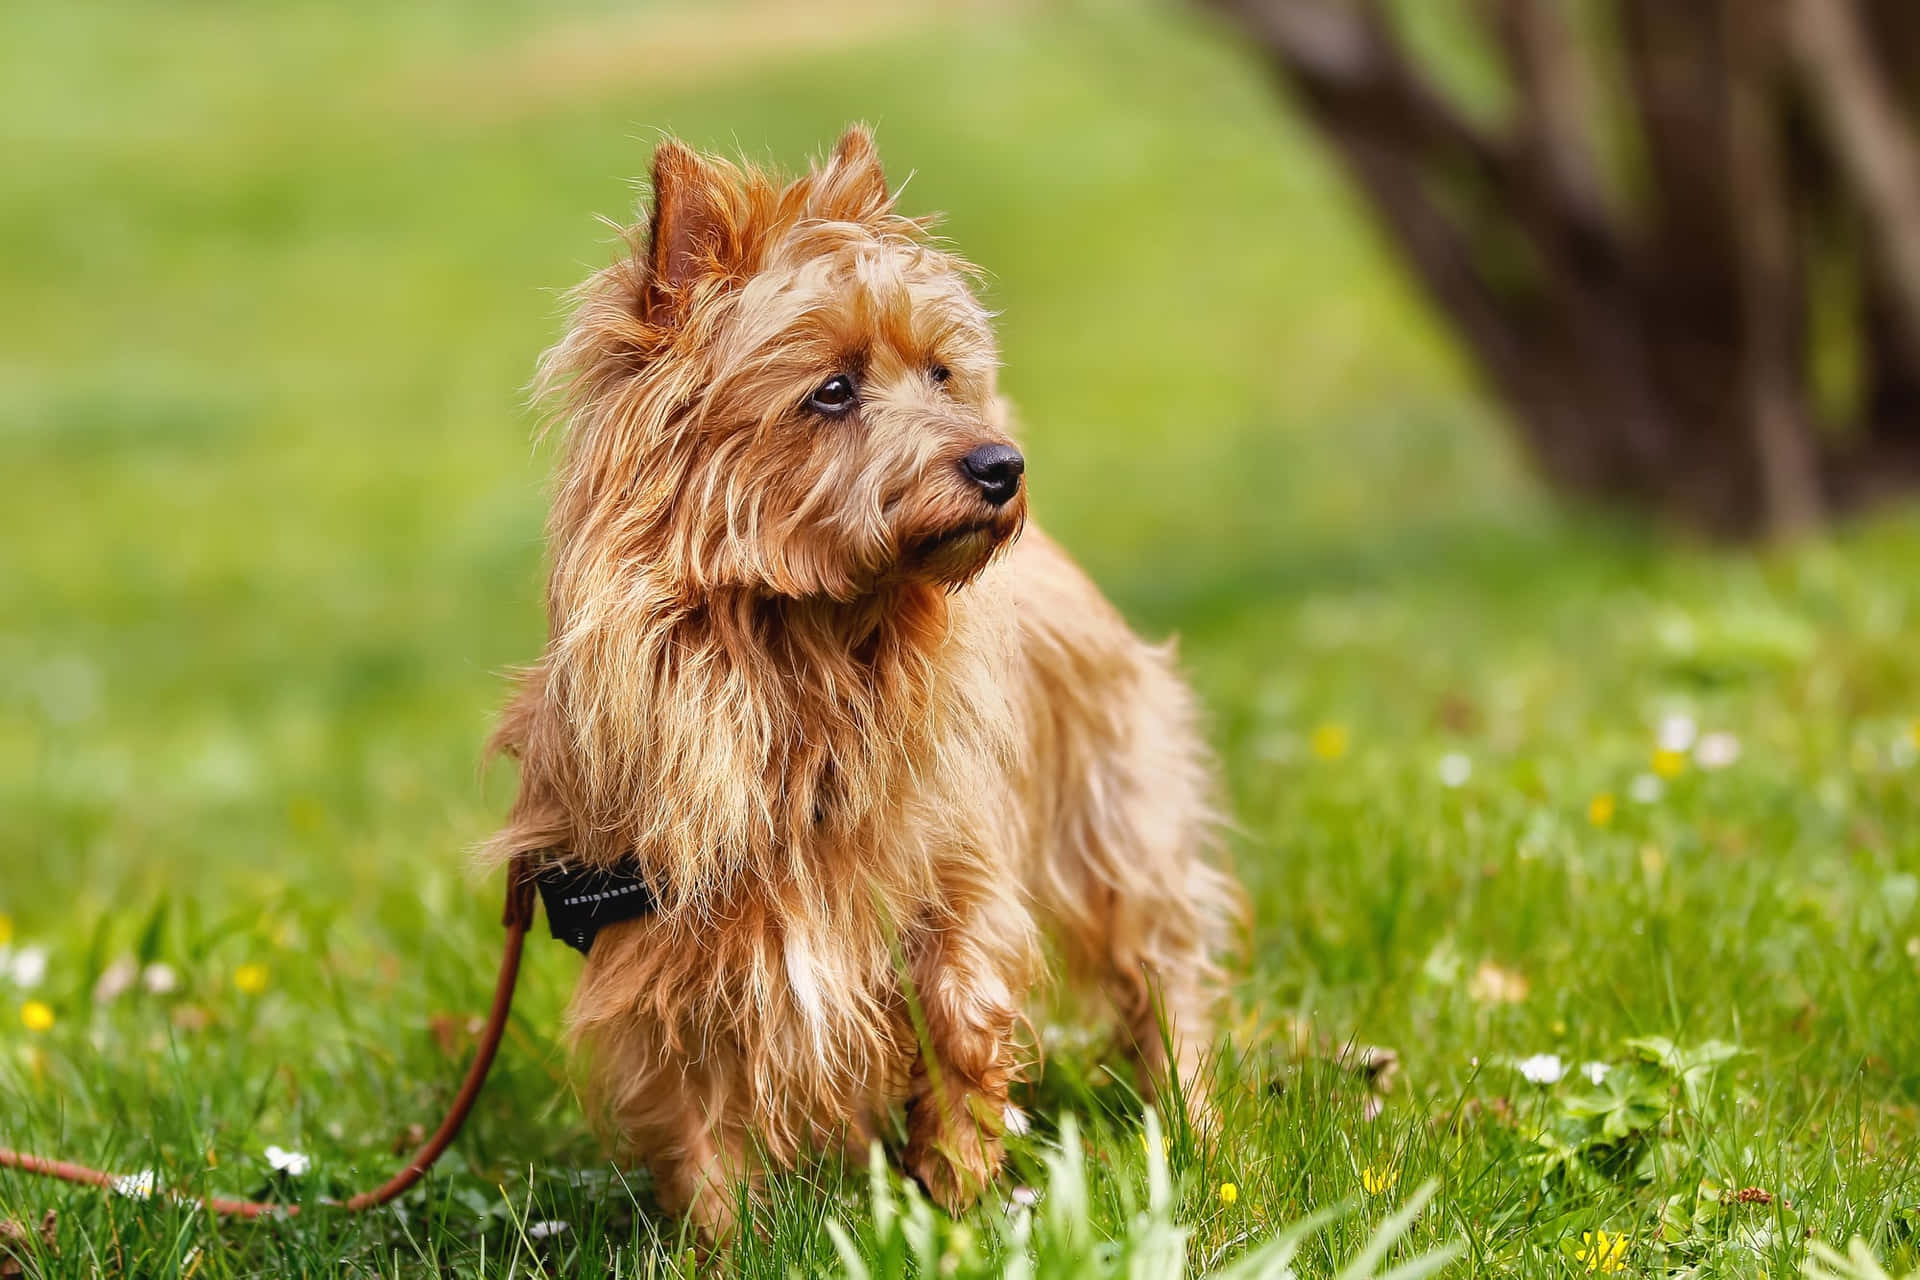 A Small Brown Dog Standing In The Grass